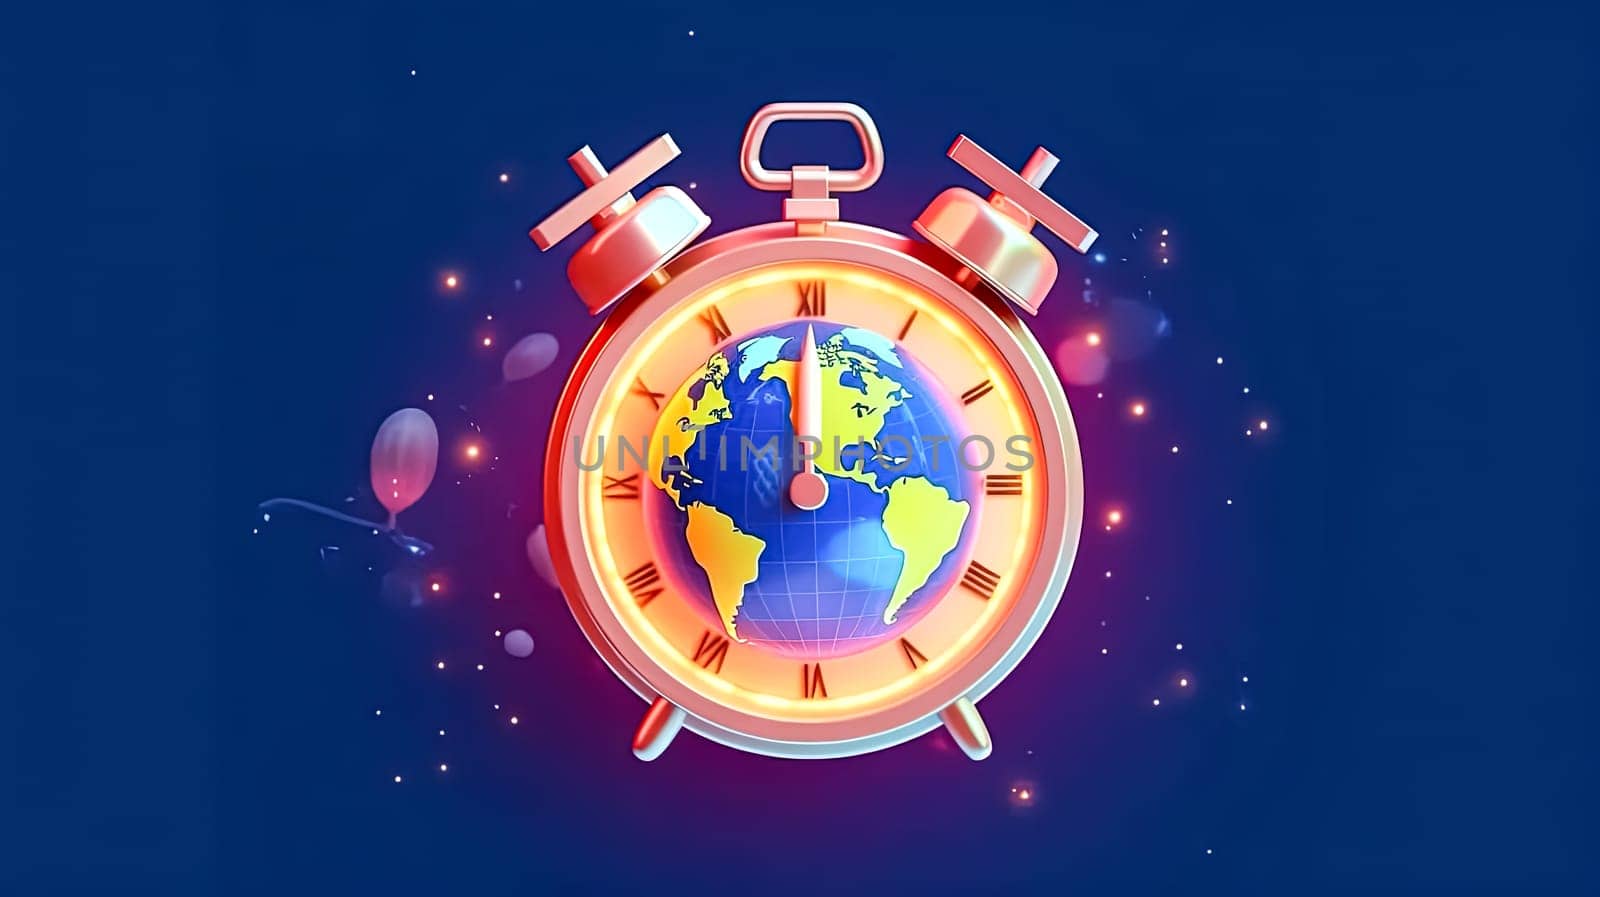 Clock on our planet a powerful image by Alla_Morozova93